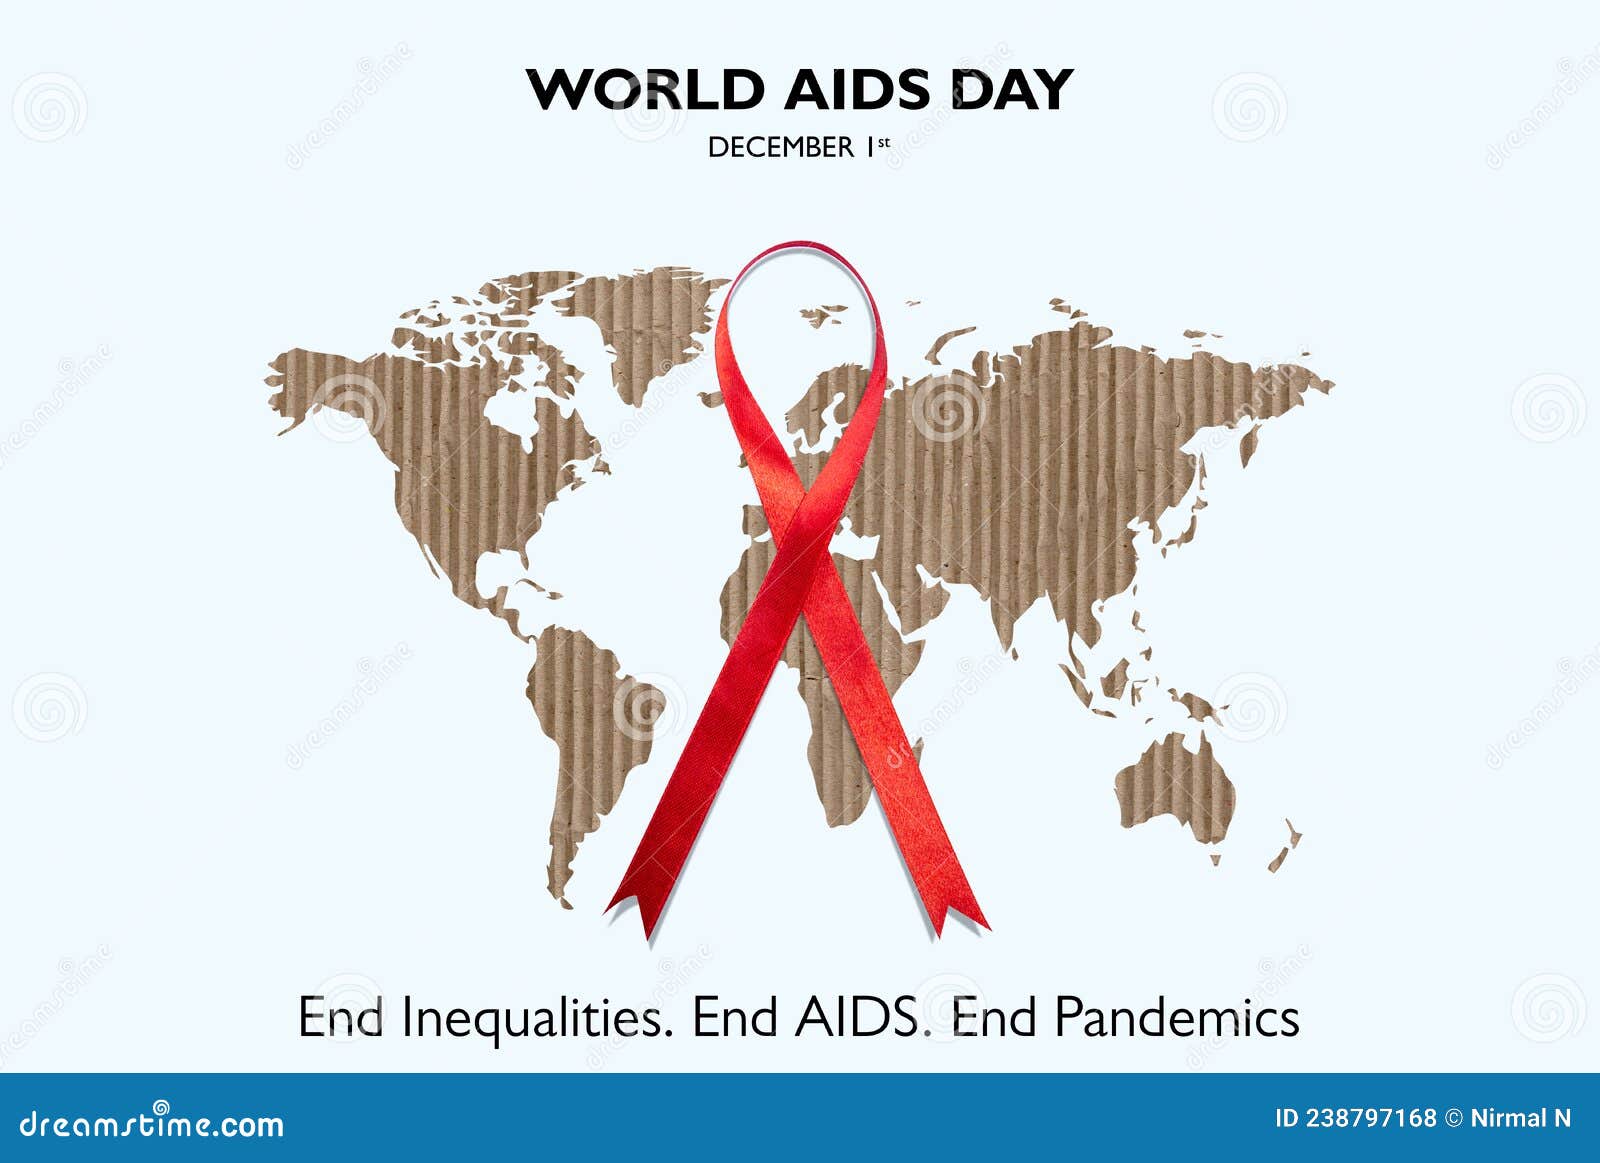 World Aids Day December 1st text with red ribbon symbol